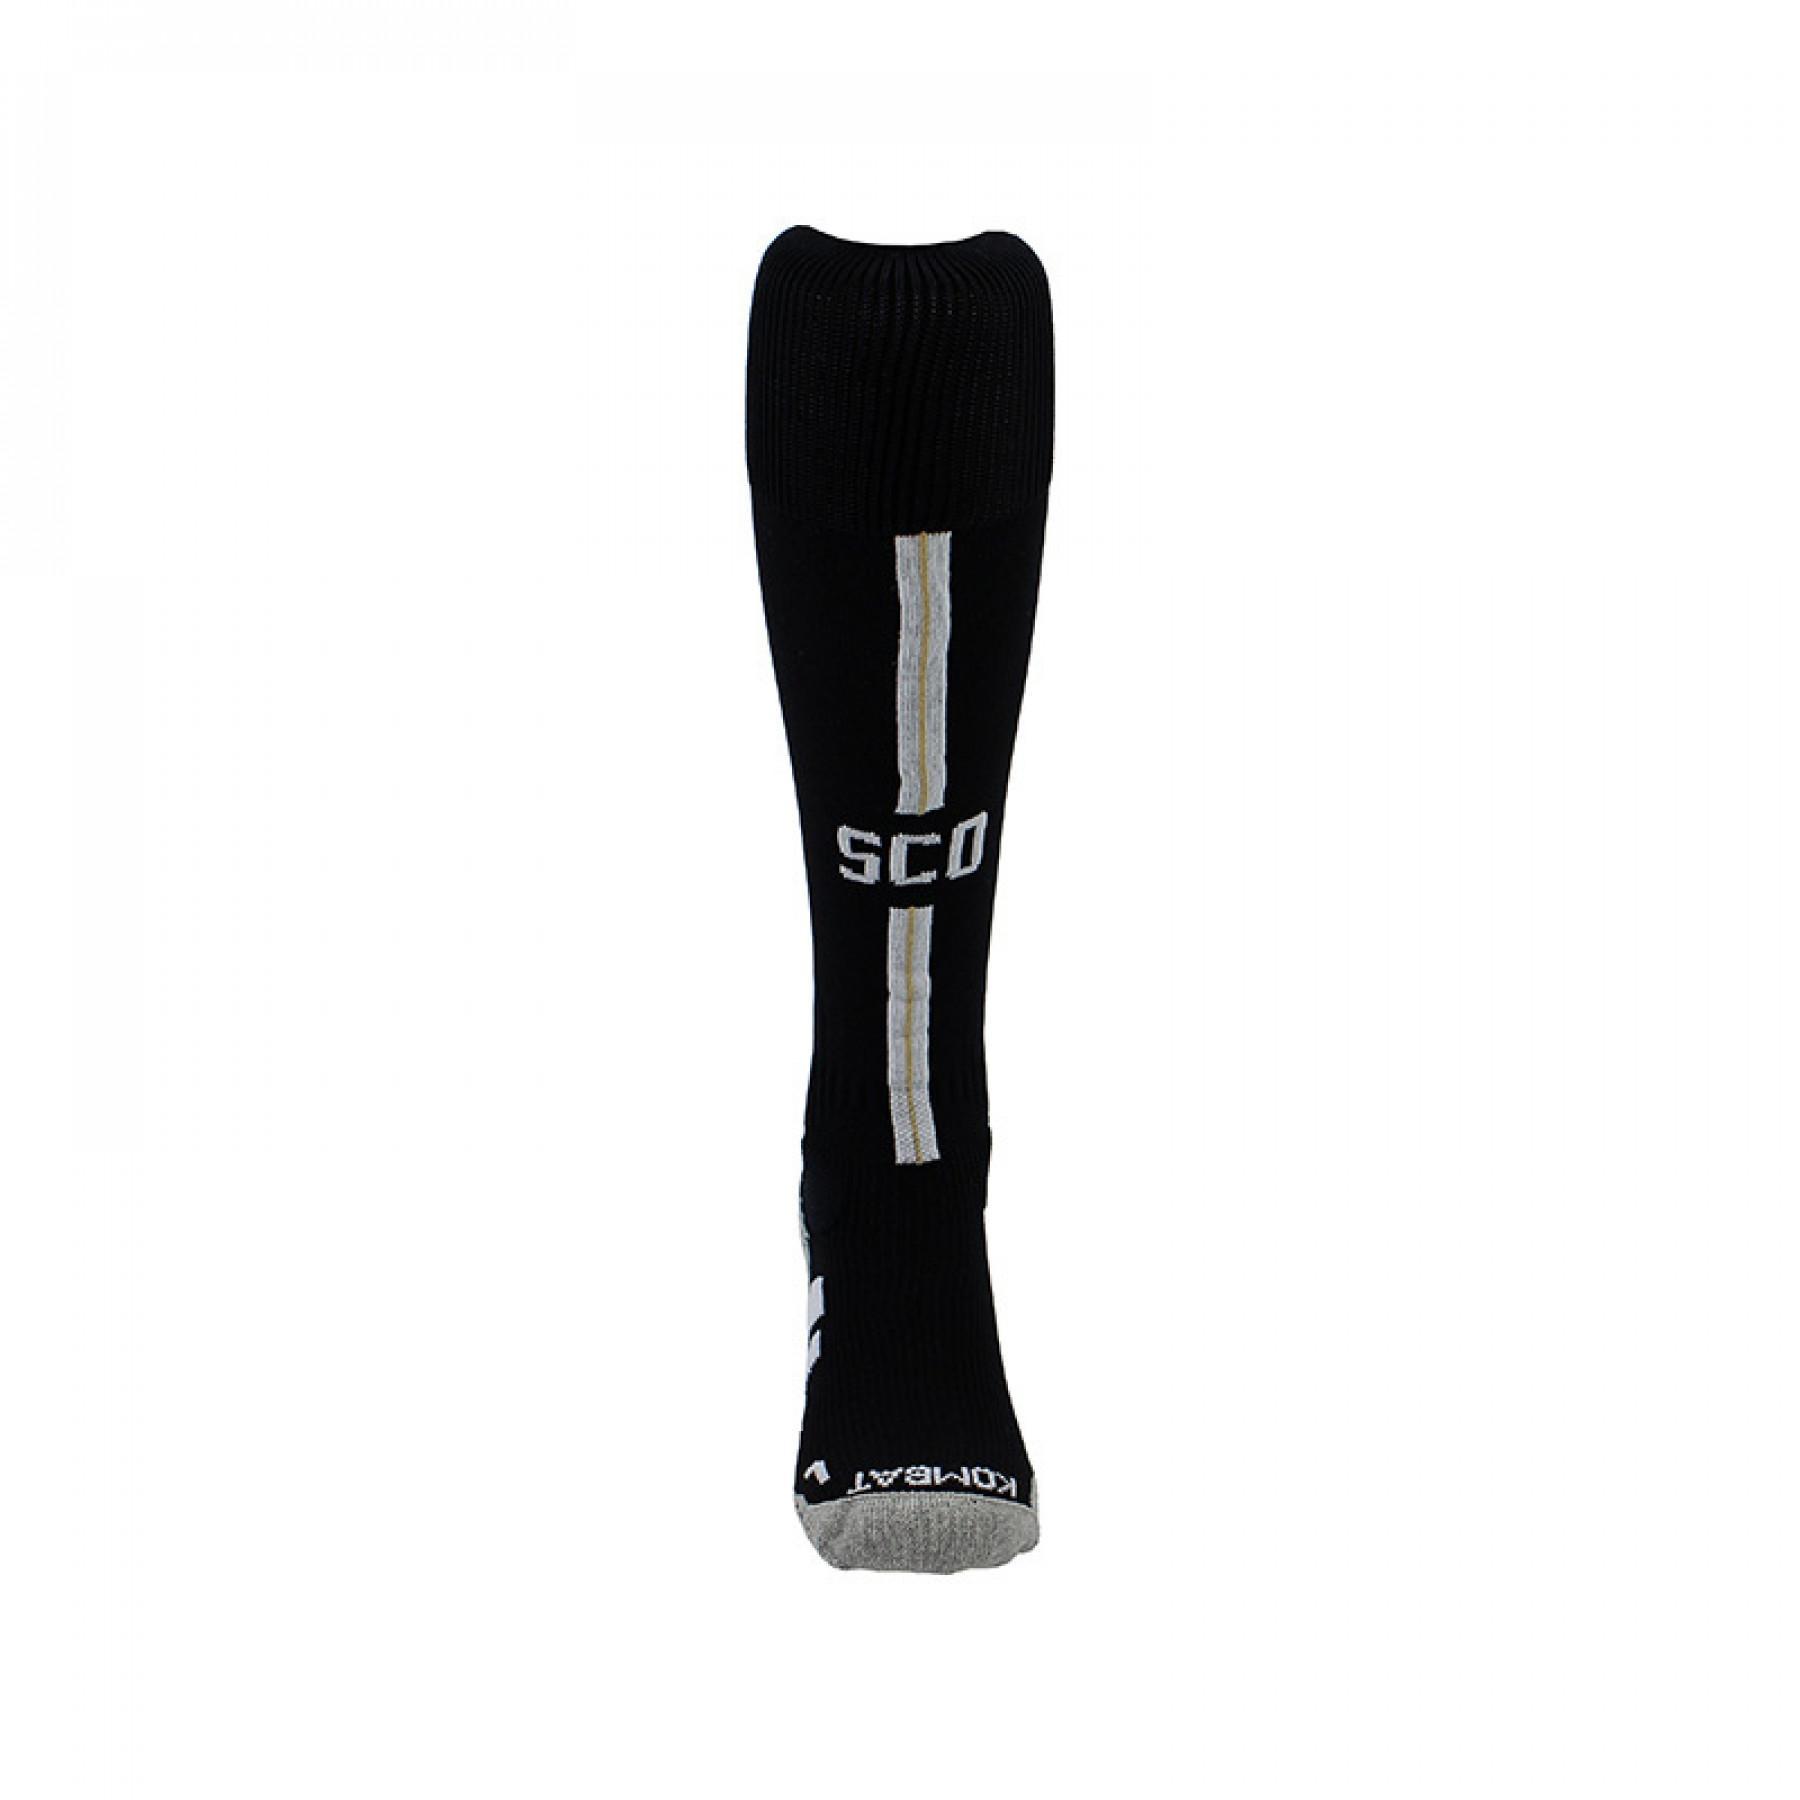 Pack of 3 pairs of home socks Angers SCO 2018/19